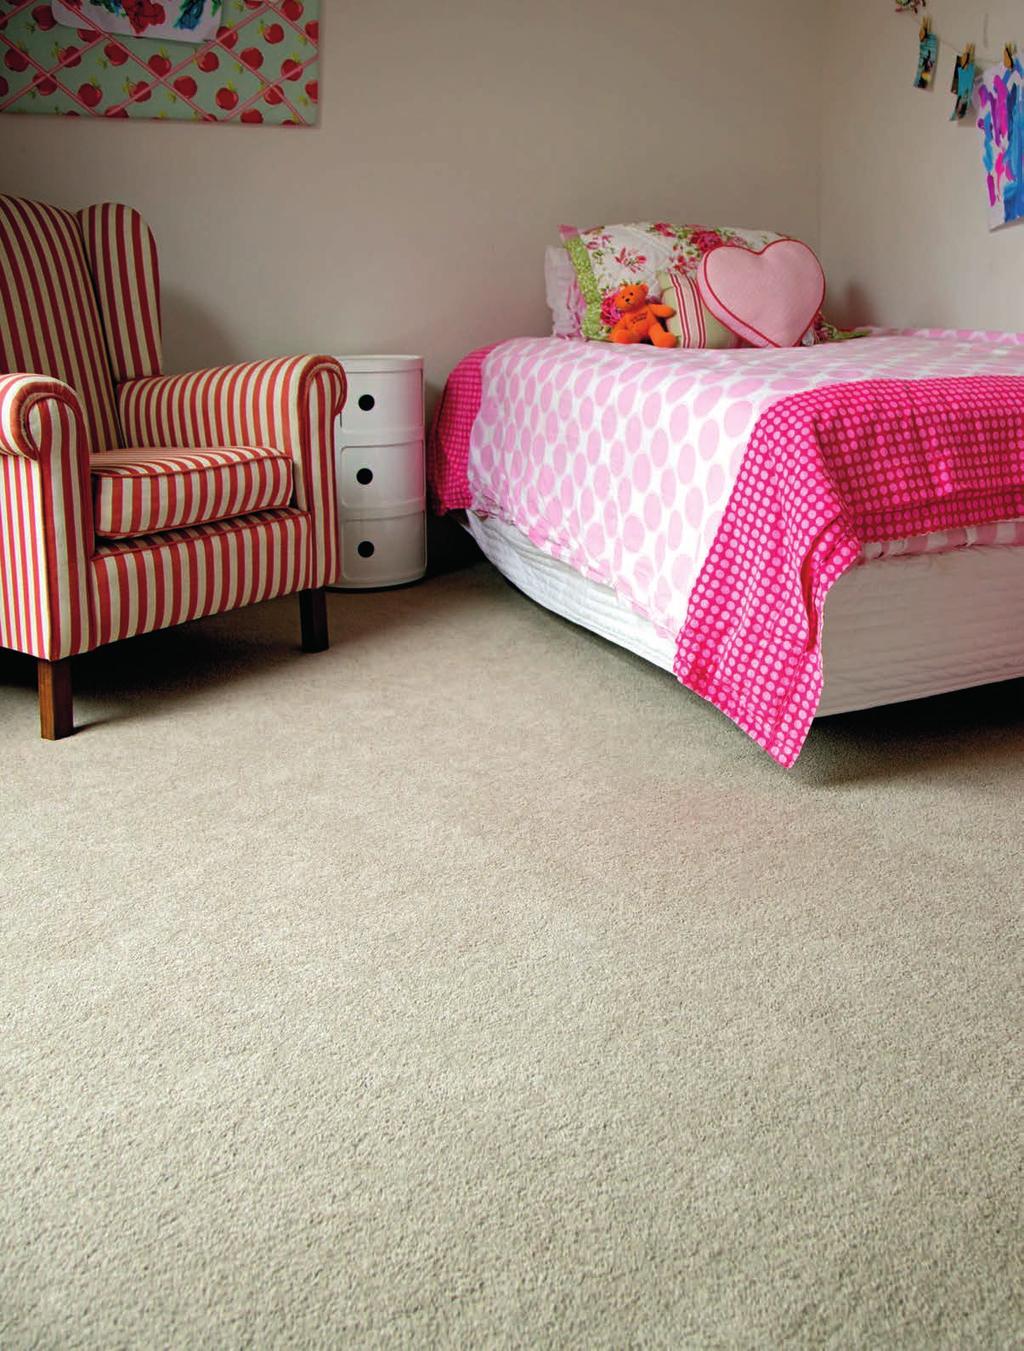 LIVE HEALTHIER. Our PSDN carpets are engineered to protect allergy sufferers of all ages from respiratory problems.